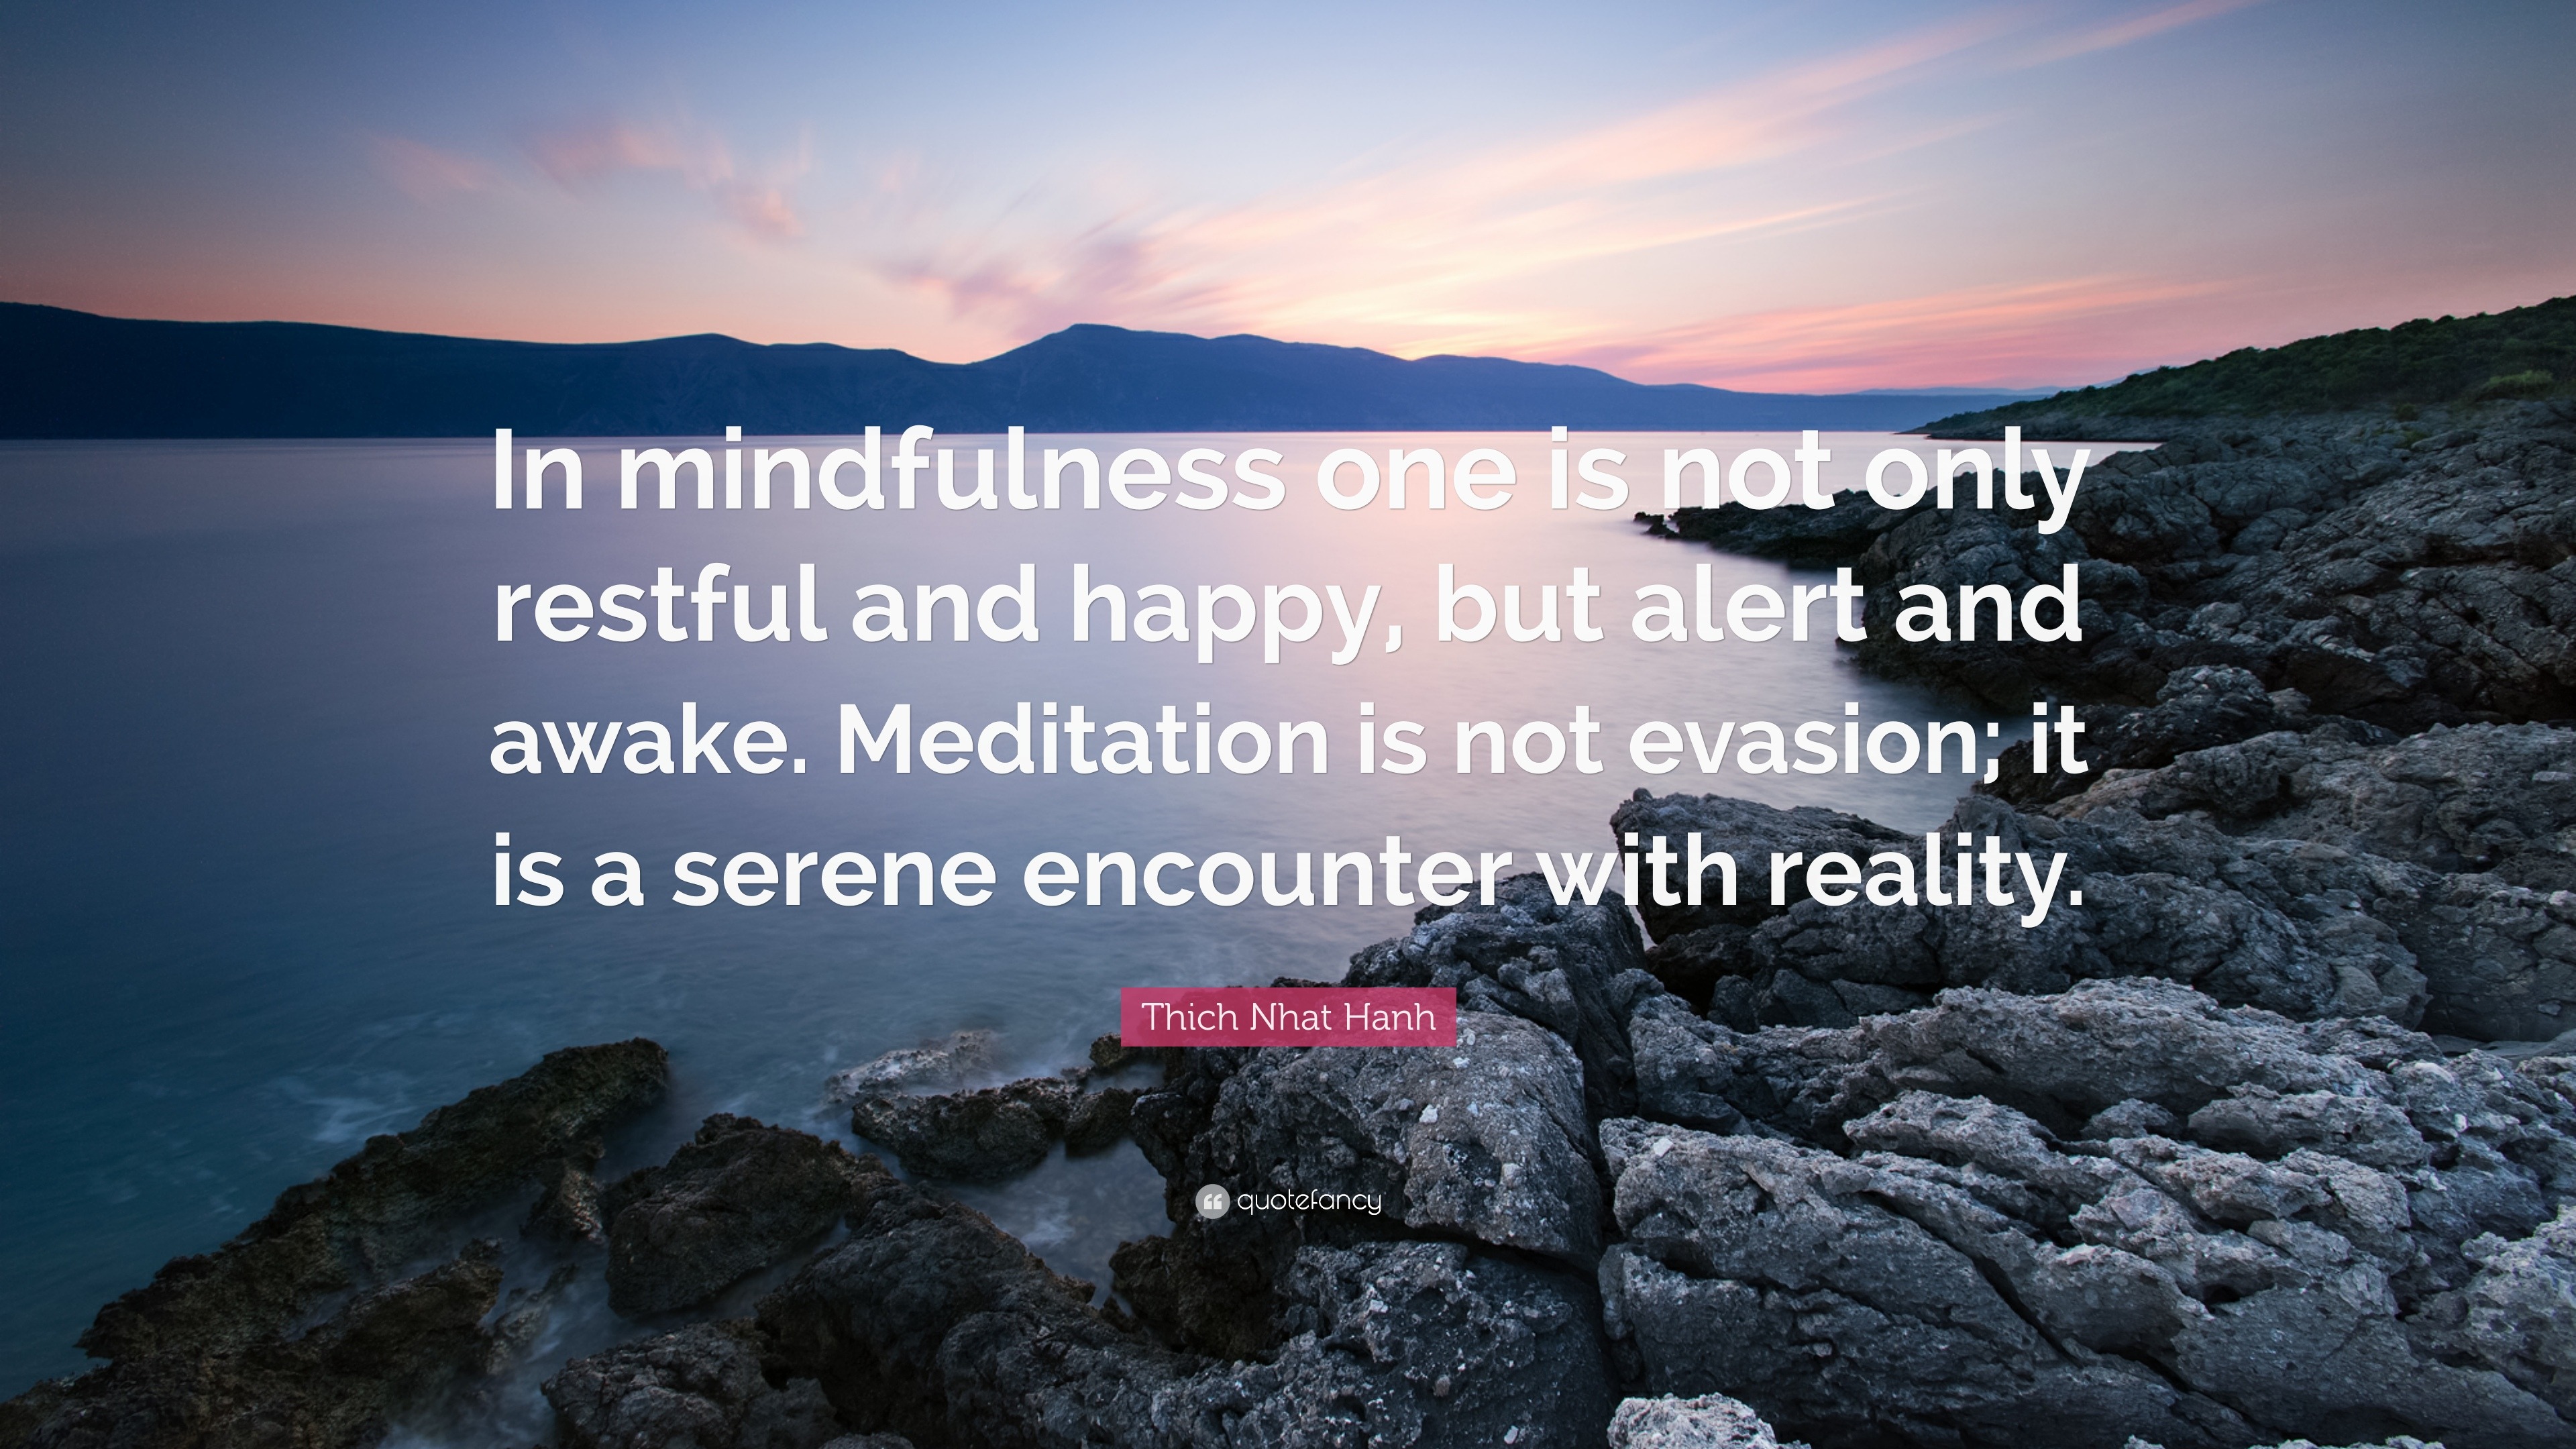 Thich Nhat Hanh Quote “In mindfulness one is not only restful and happy